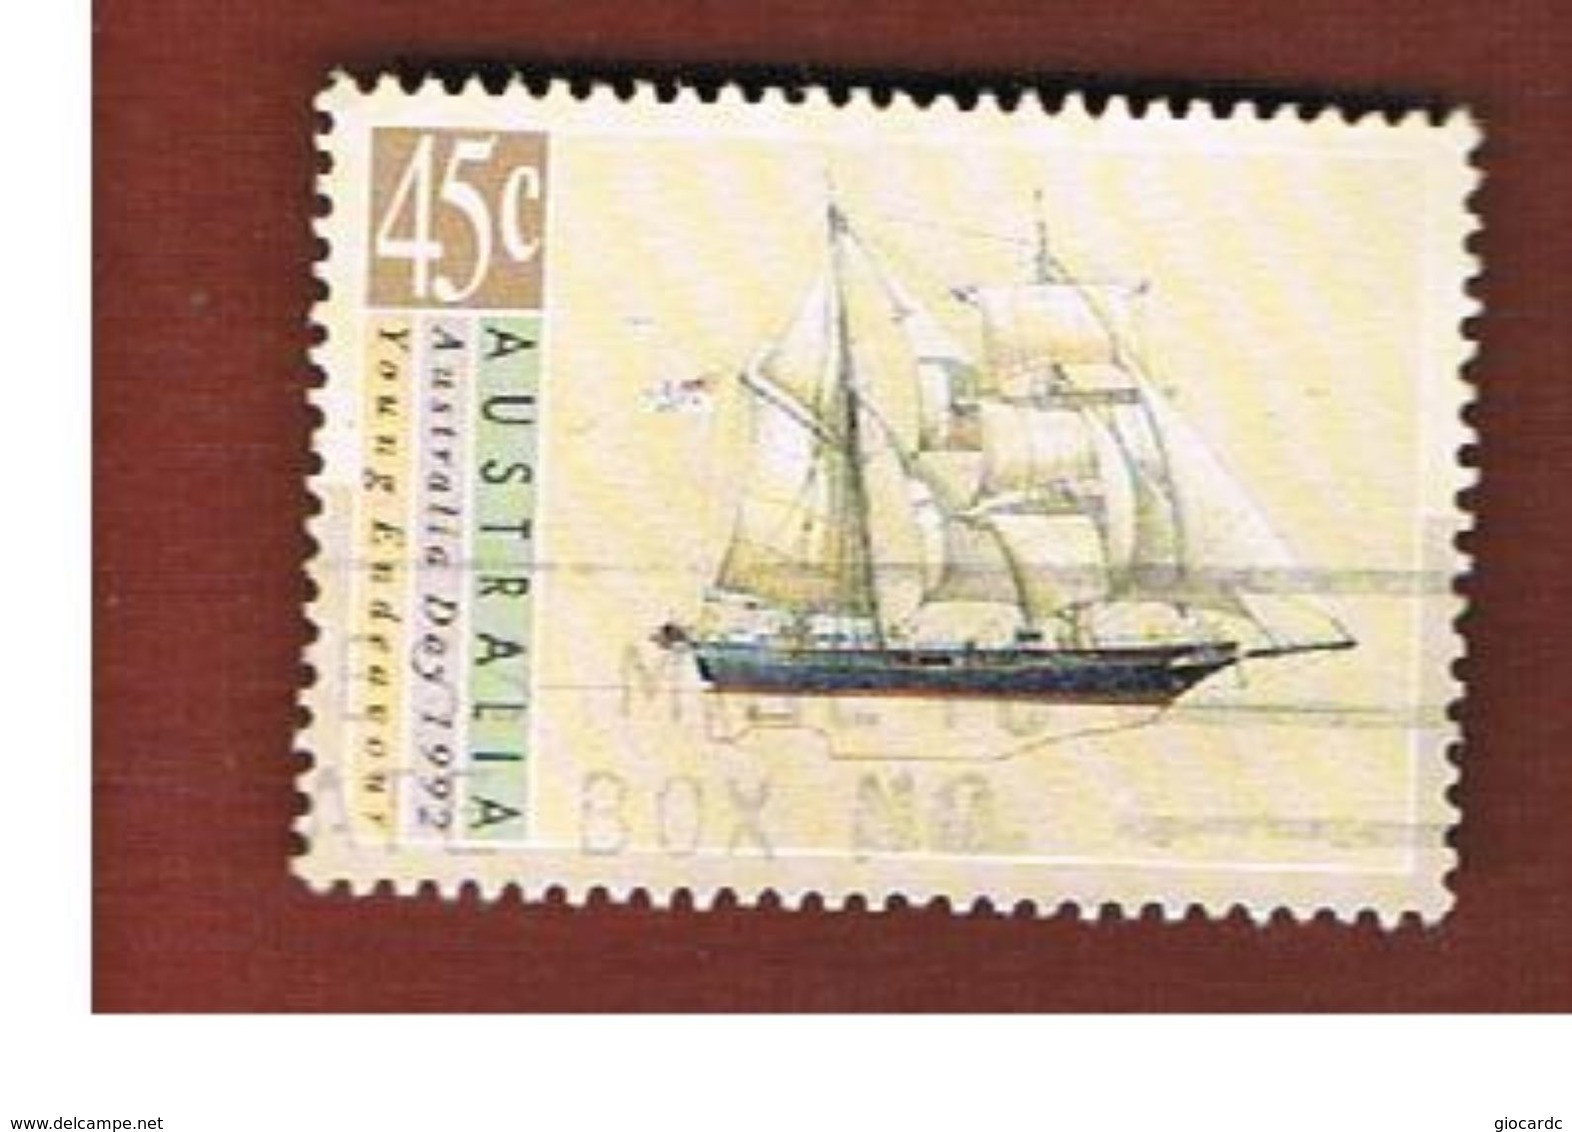 AUSTRALIA  -  SG 1333  -      1992 SHIPS: YOUNG ENDEAVOUR           -       USED - Used Stamps